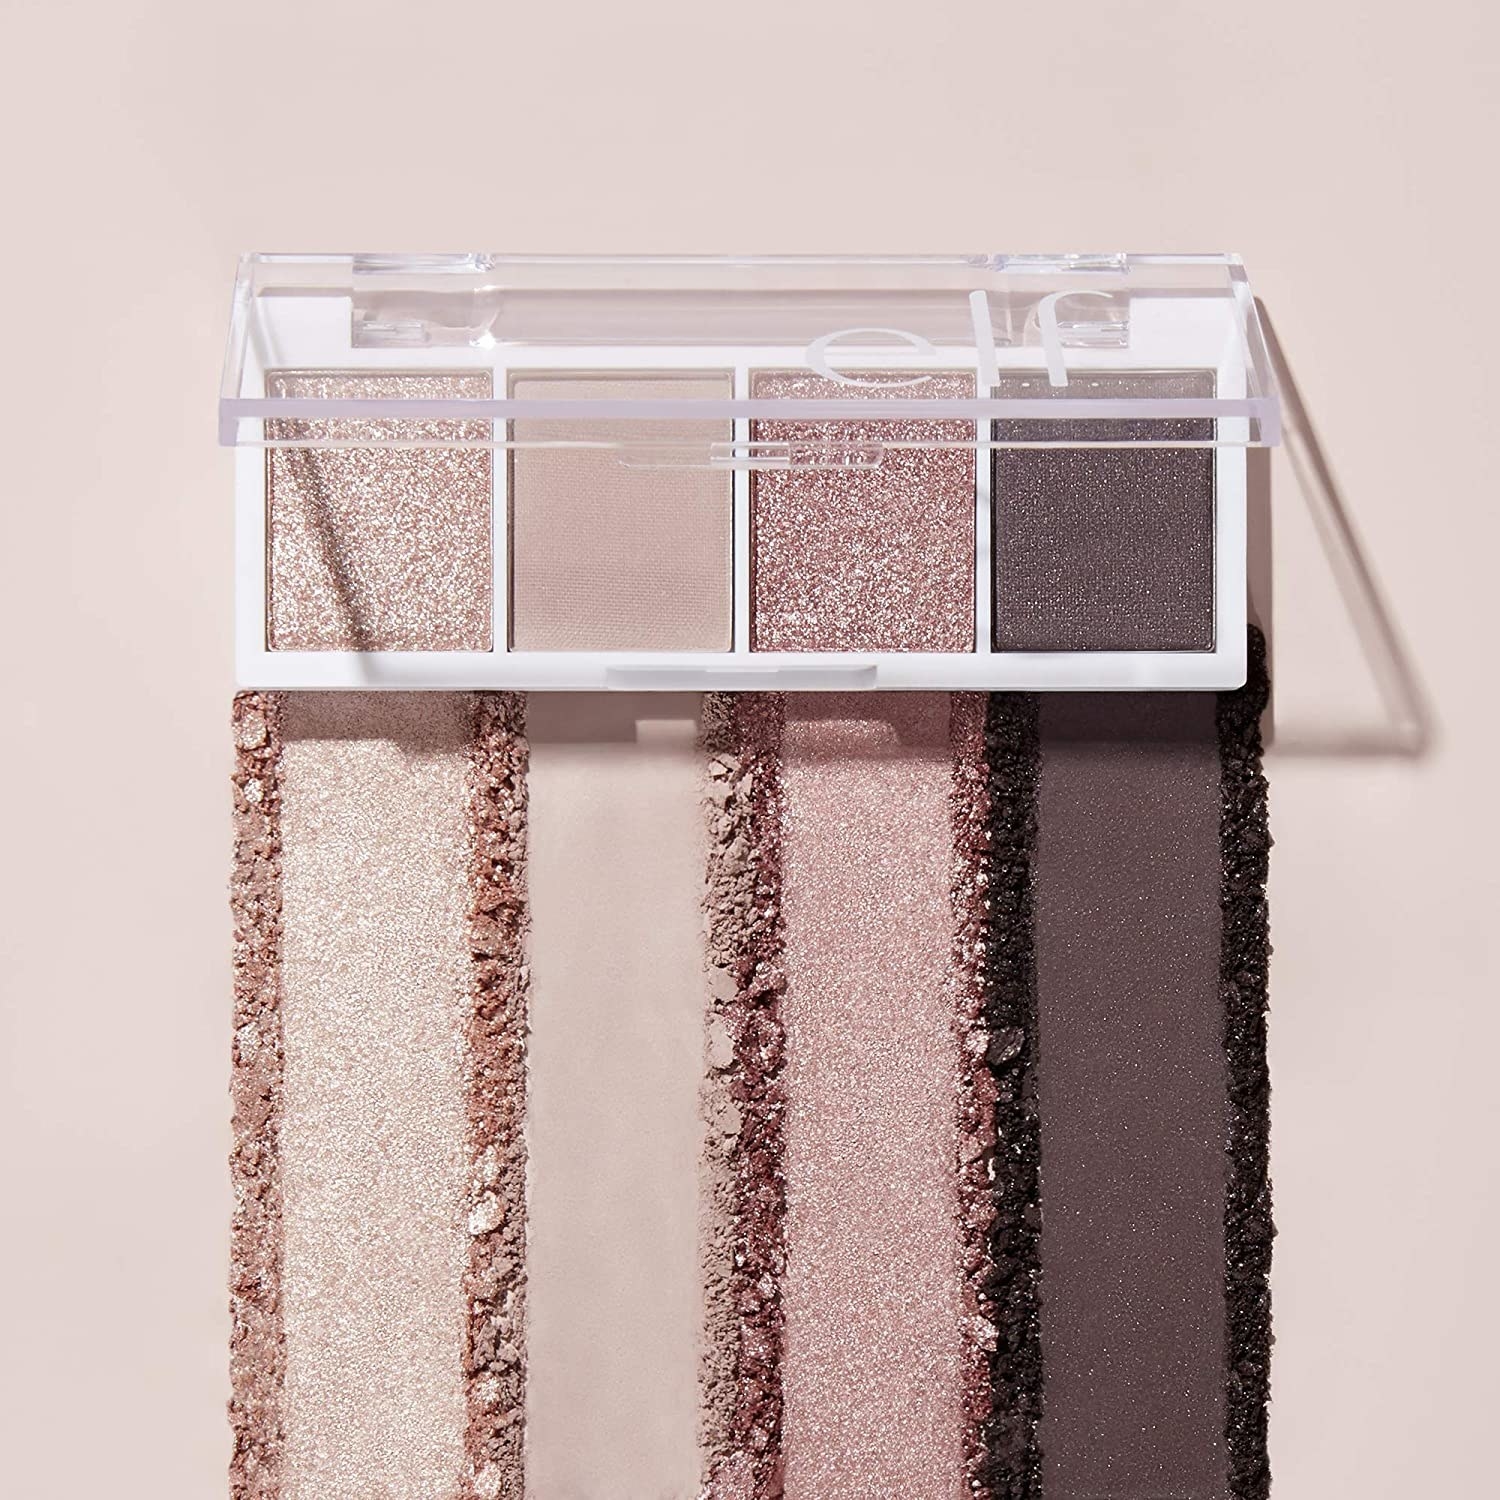 The open quad with four swatches of product